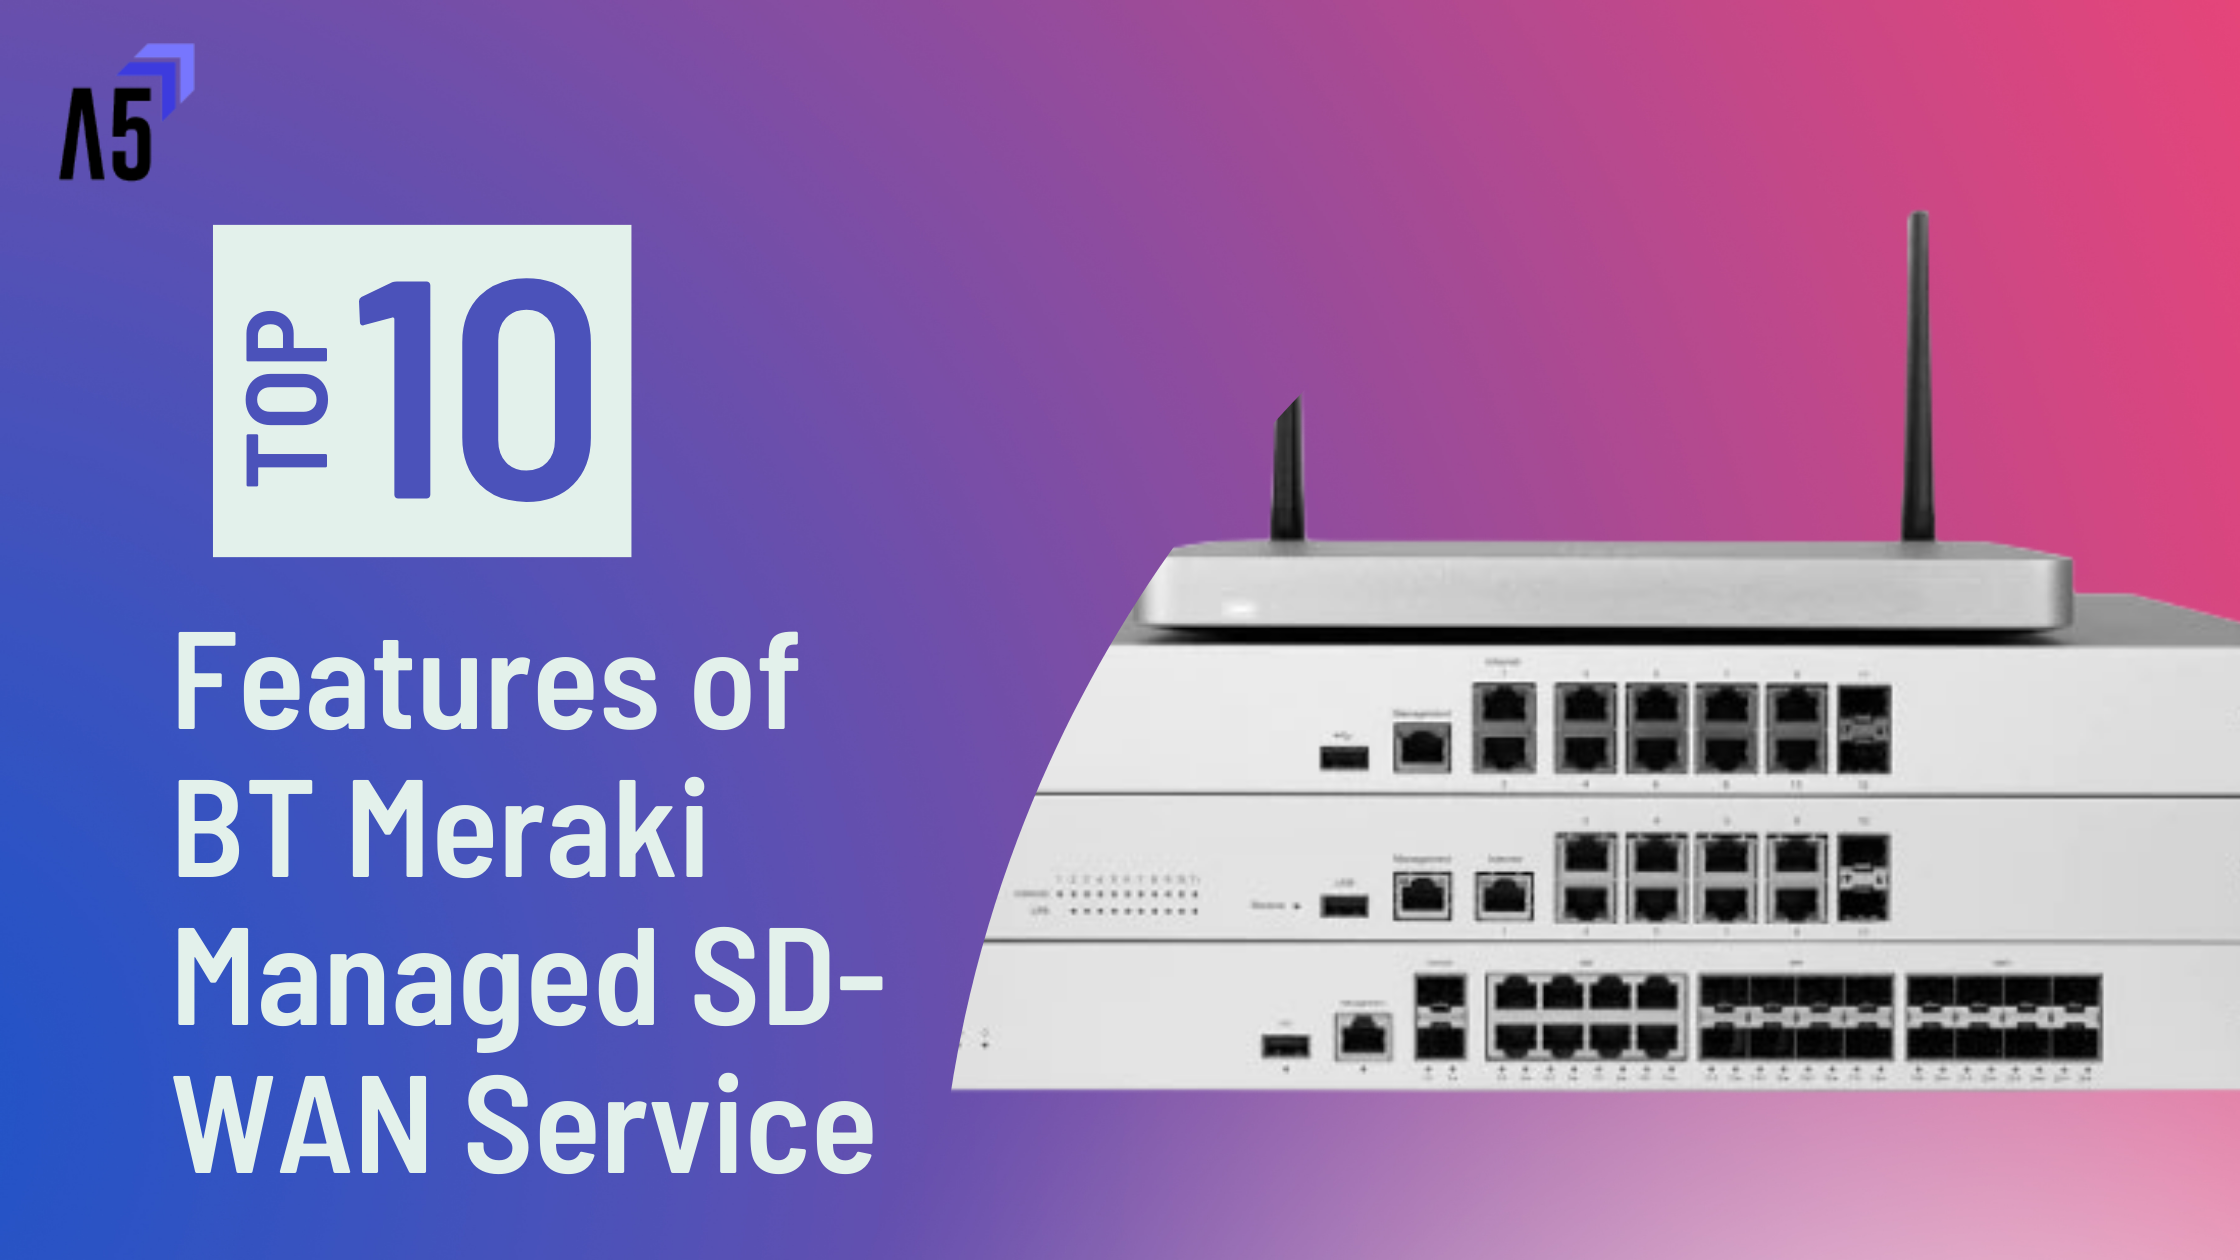 The Top 10 Features of BT Meraki Managed SD-WAN Services